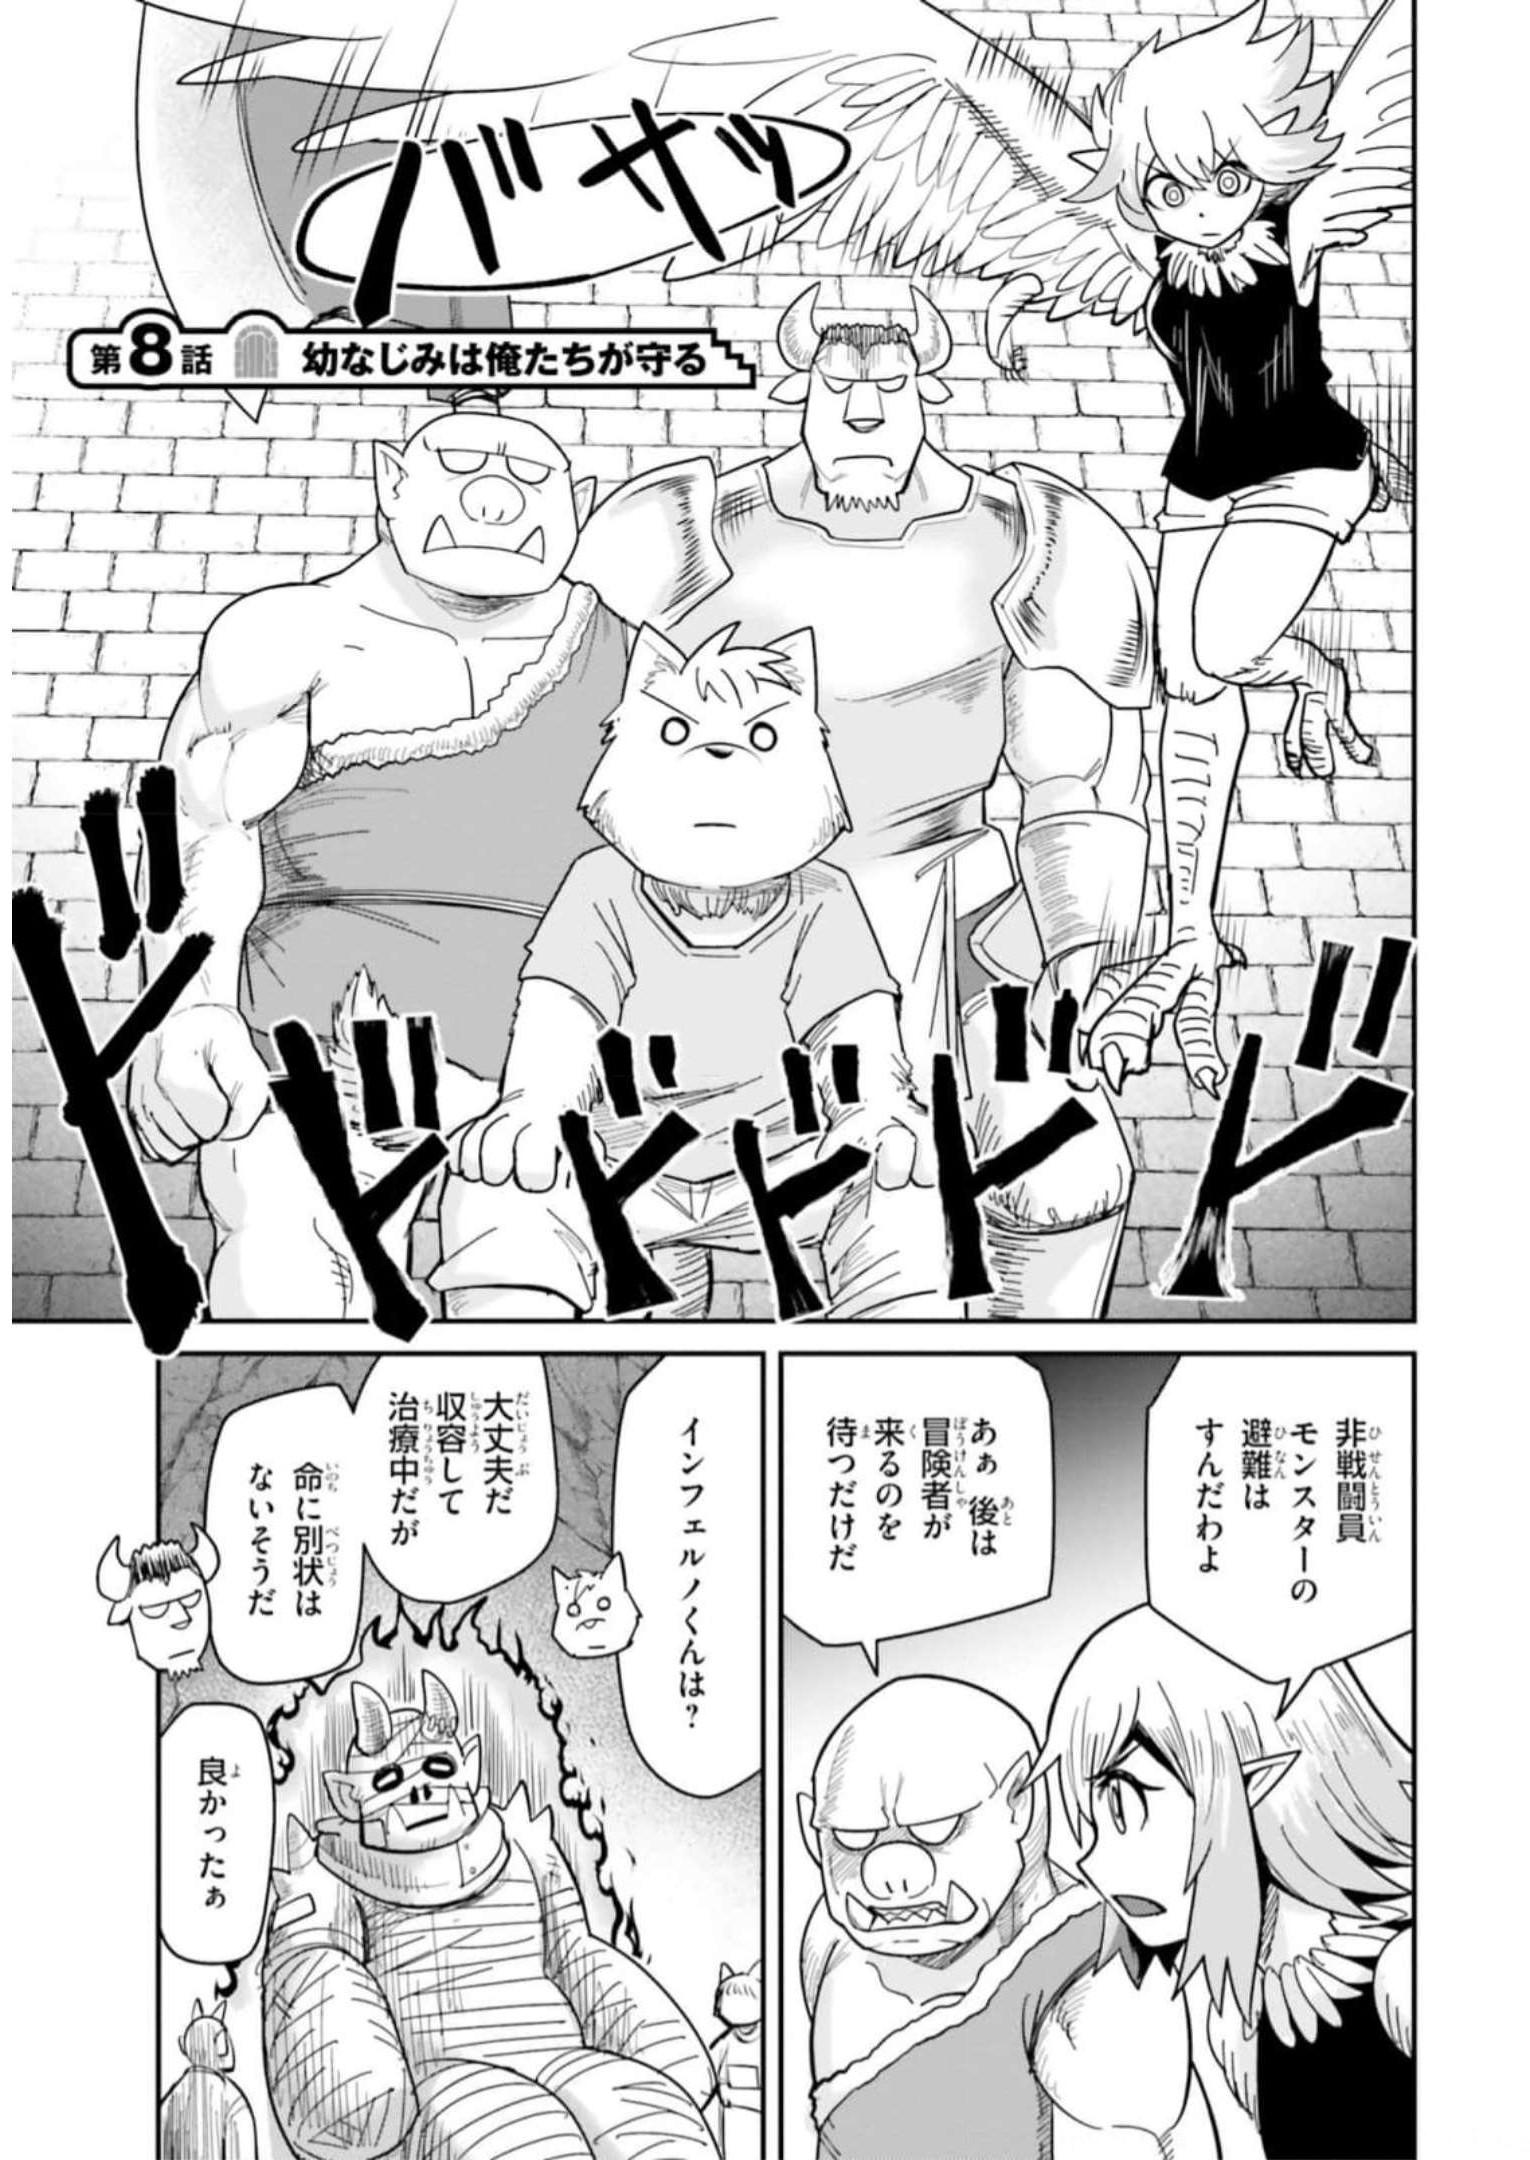 Dungeon Friends Forever Dungeon's Childhood Friend ダンジョンの幼なじみ 第8話 - Page 3